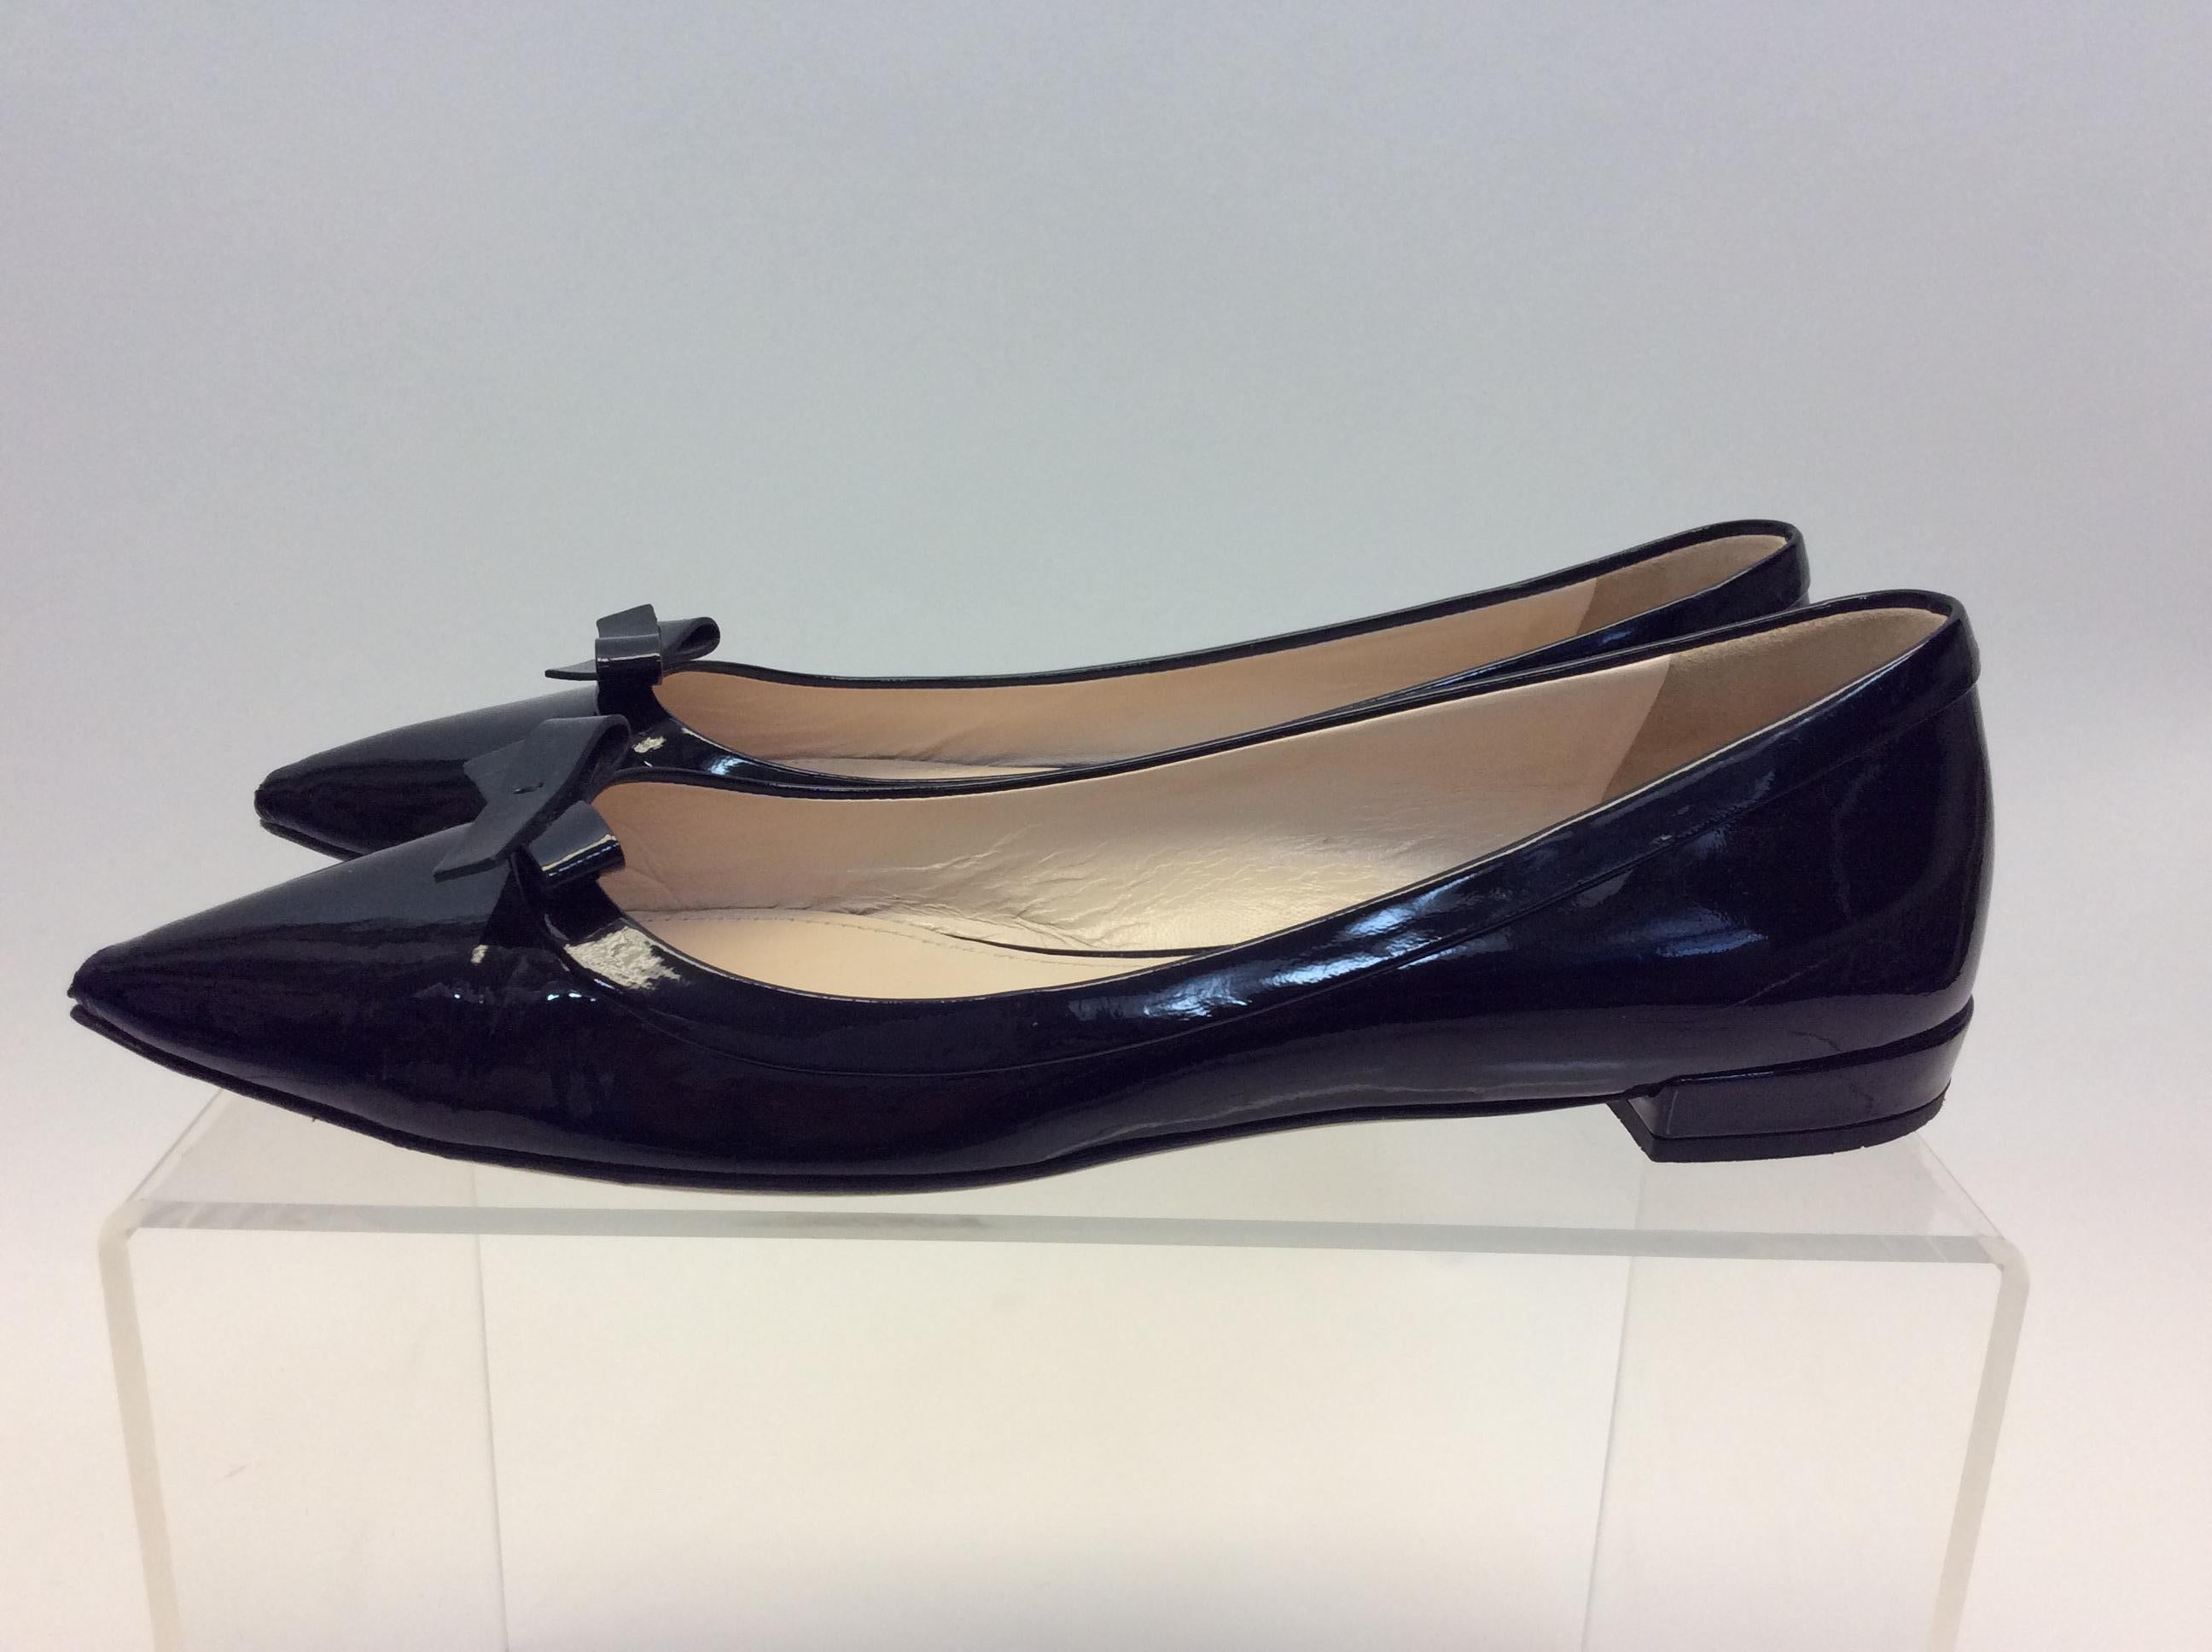 Prada Black Patent Leather Flats
$199
Patent Leather
Made in Italy
Size 38
